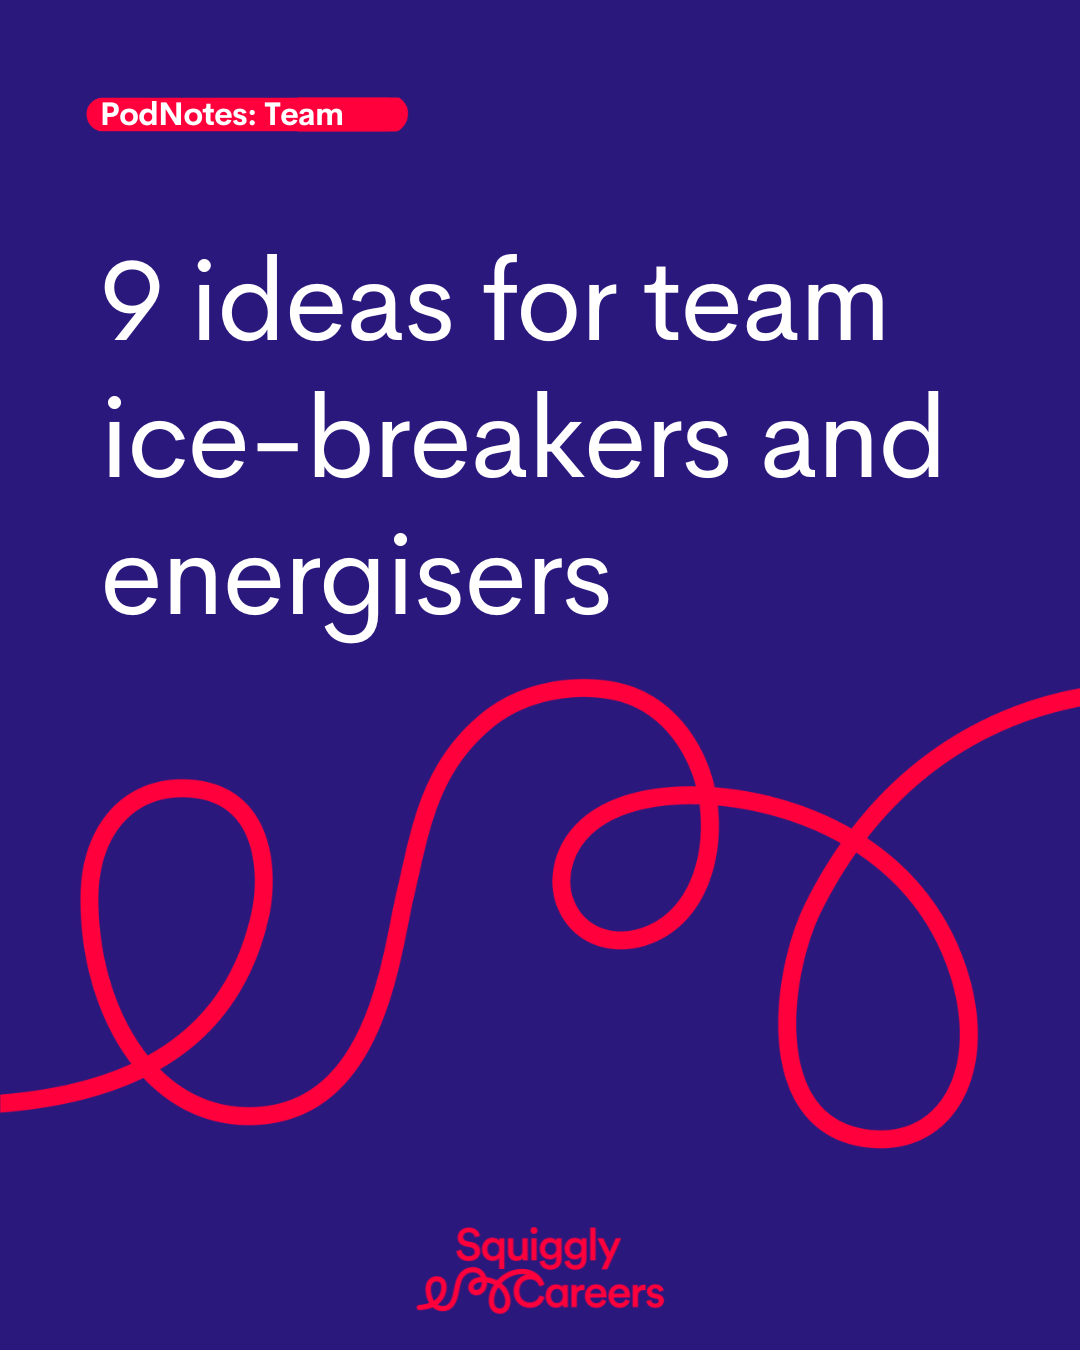 7 icebreaker games to help your team build authentic connections